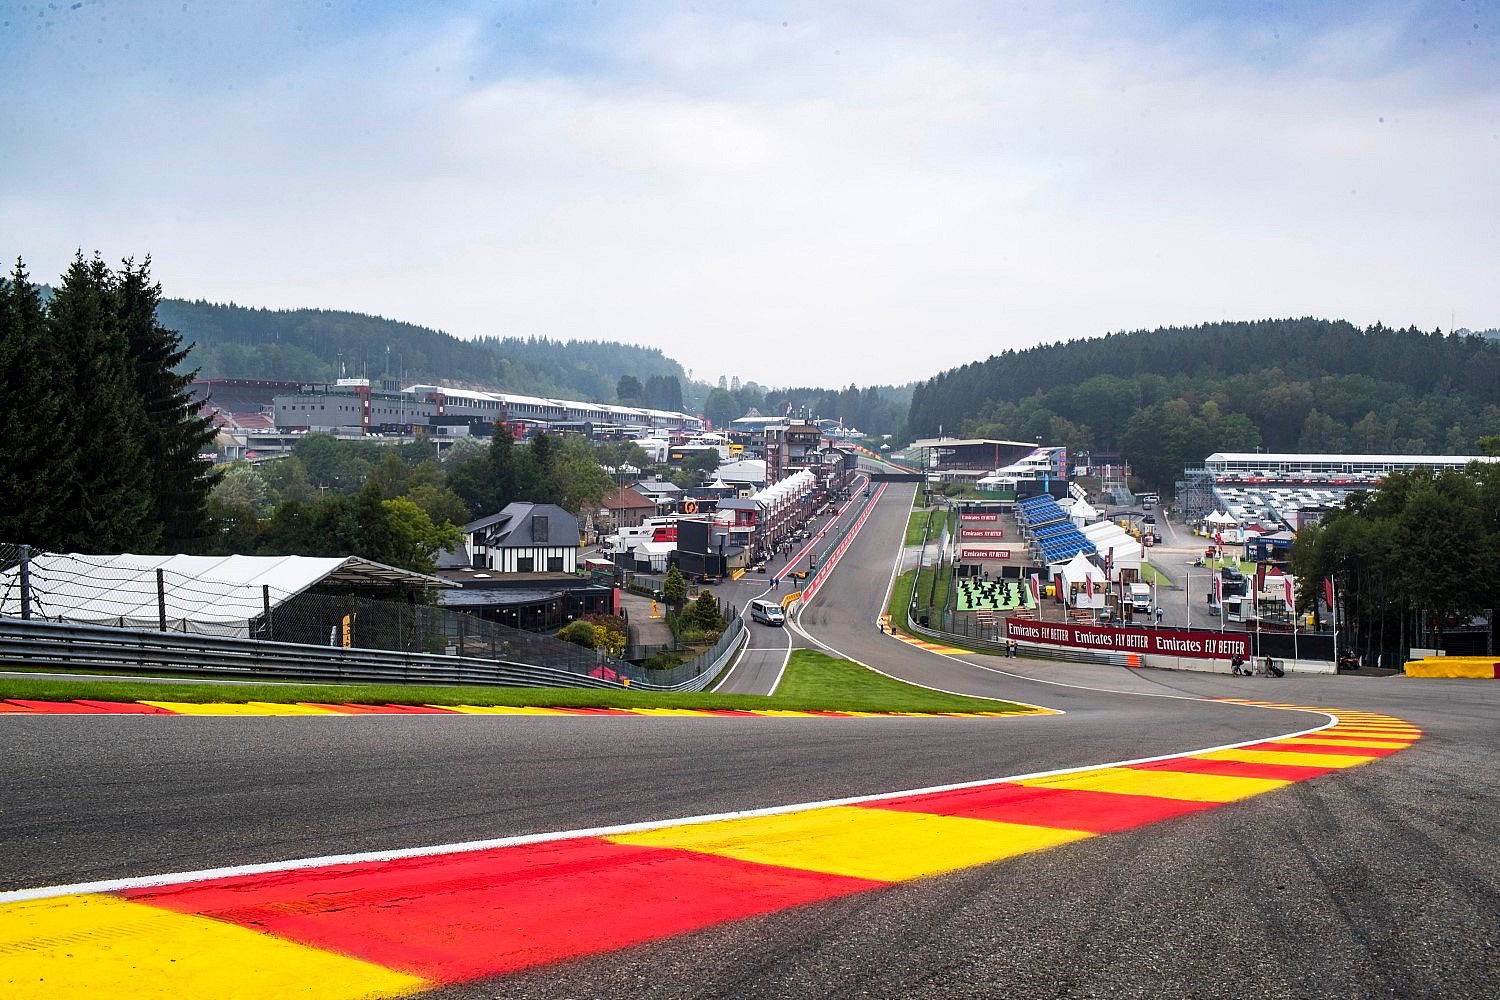 Spa given permission to lose millions and go belly-up